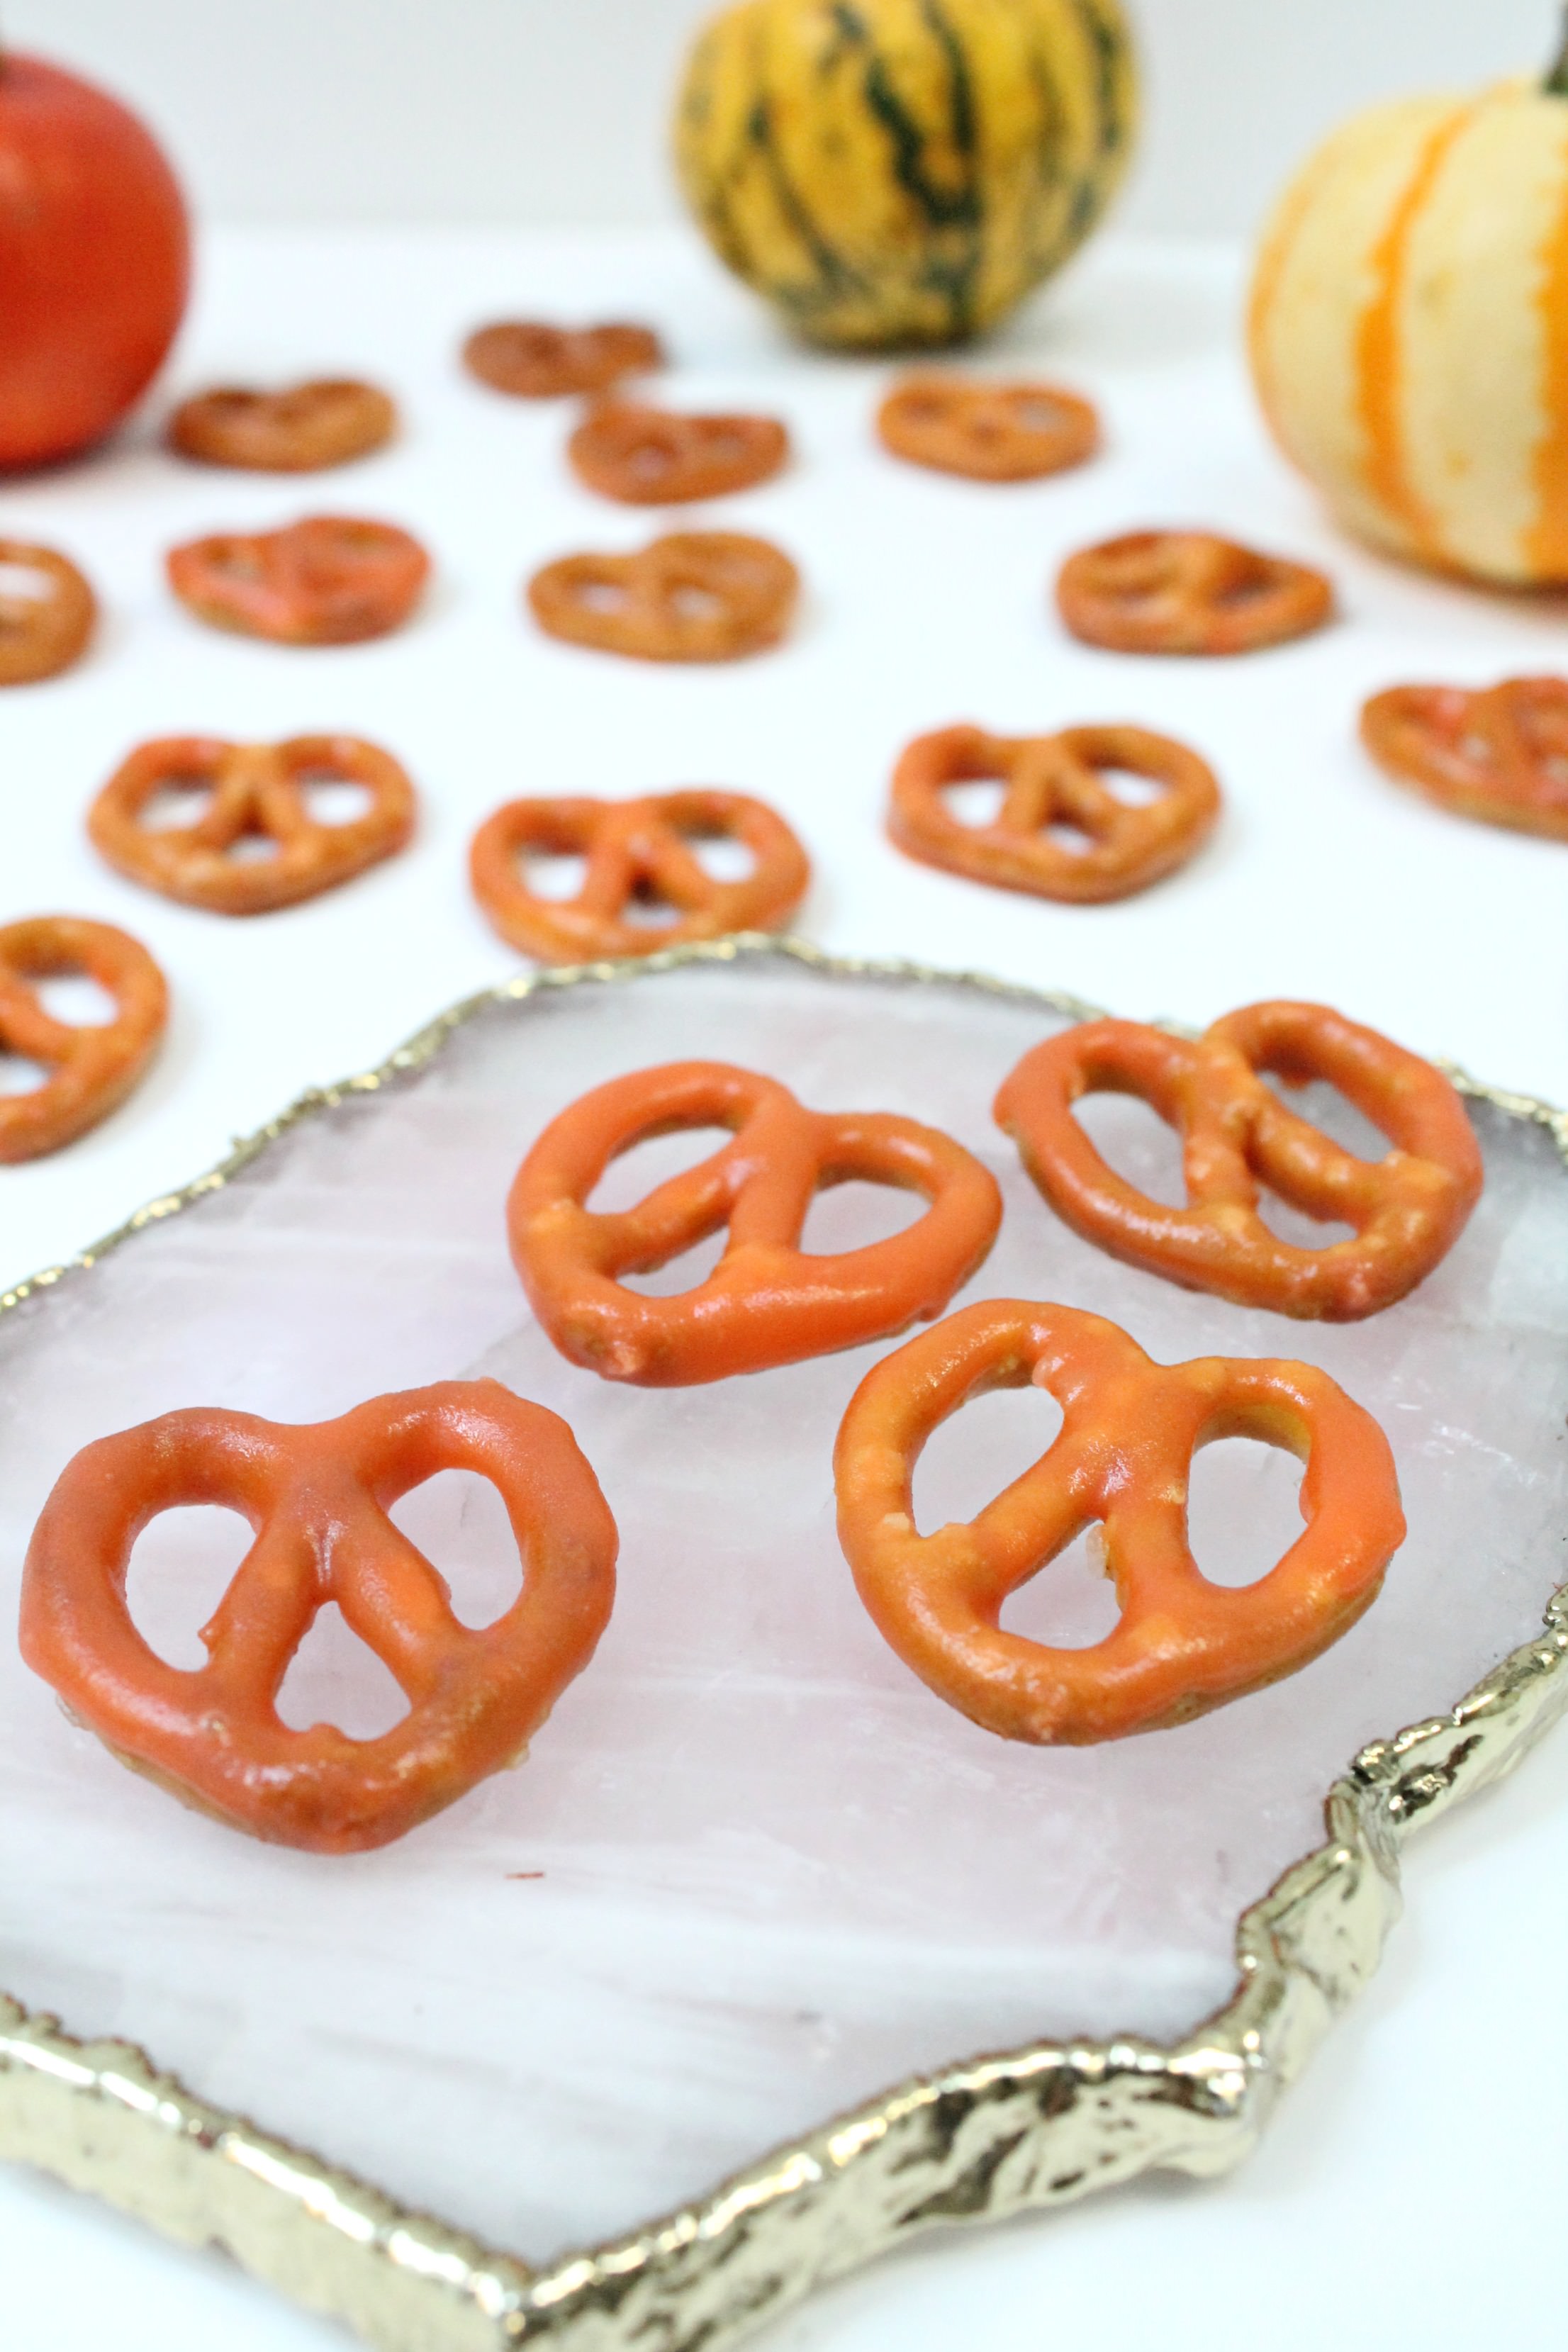 chocolate-pretzels-for-halloween-party-photo-by-geraldine-tan-little-big-bell